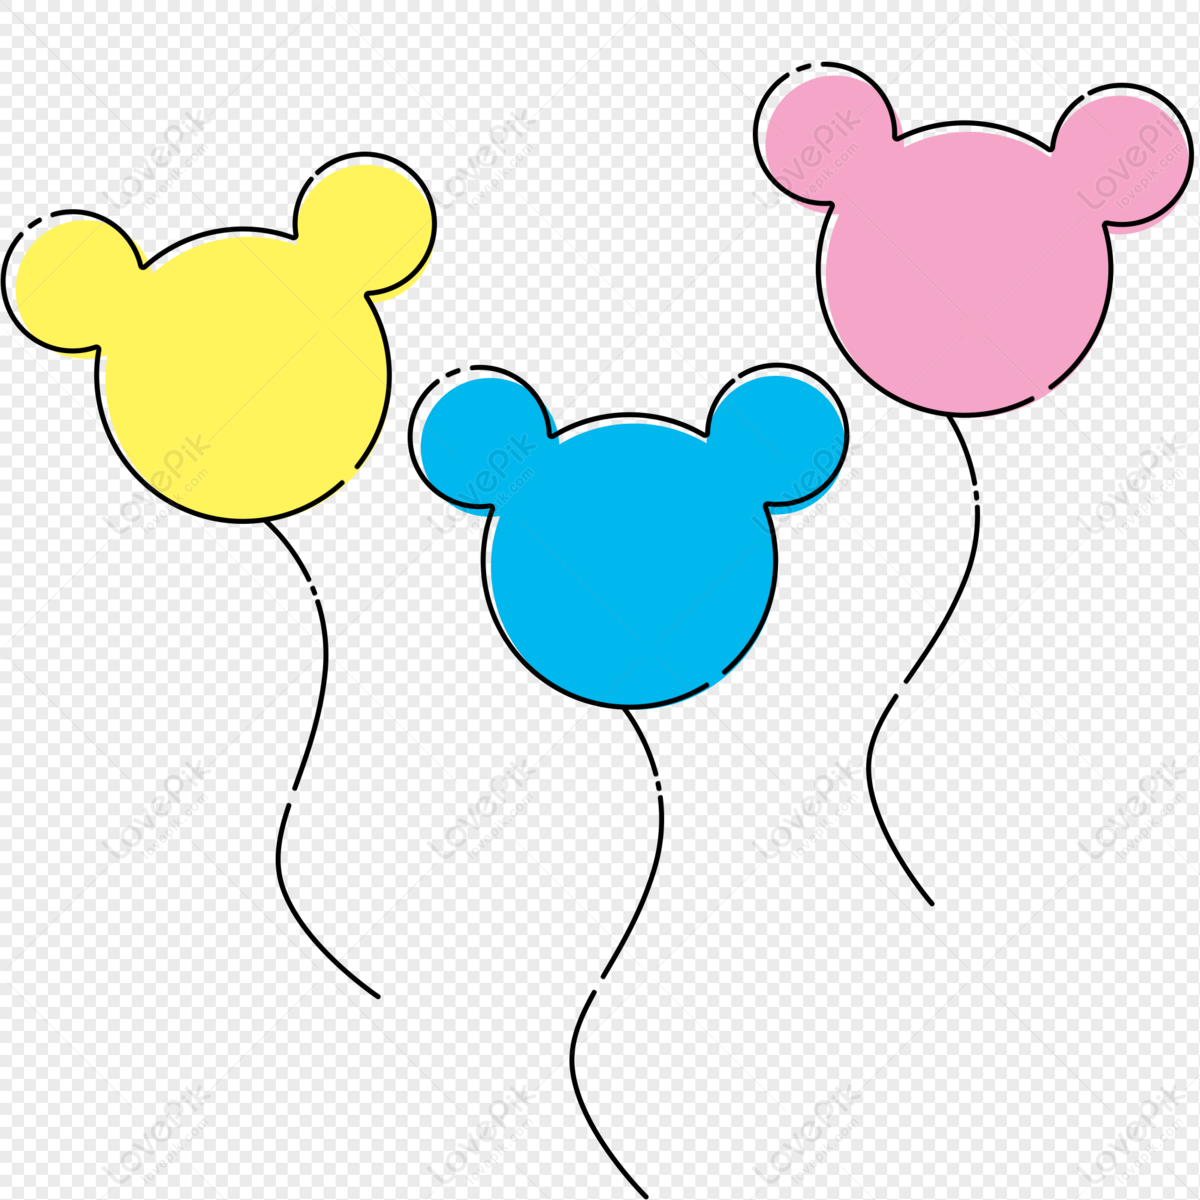 Childrens Day Cartoon Balloon PNG Free Download And Clipart Image For Free  Download - Lovepik | 401269343